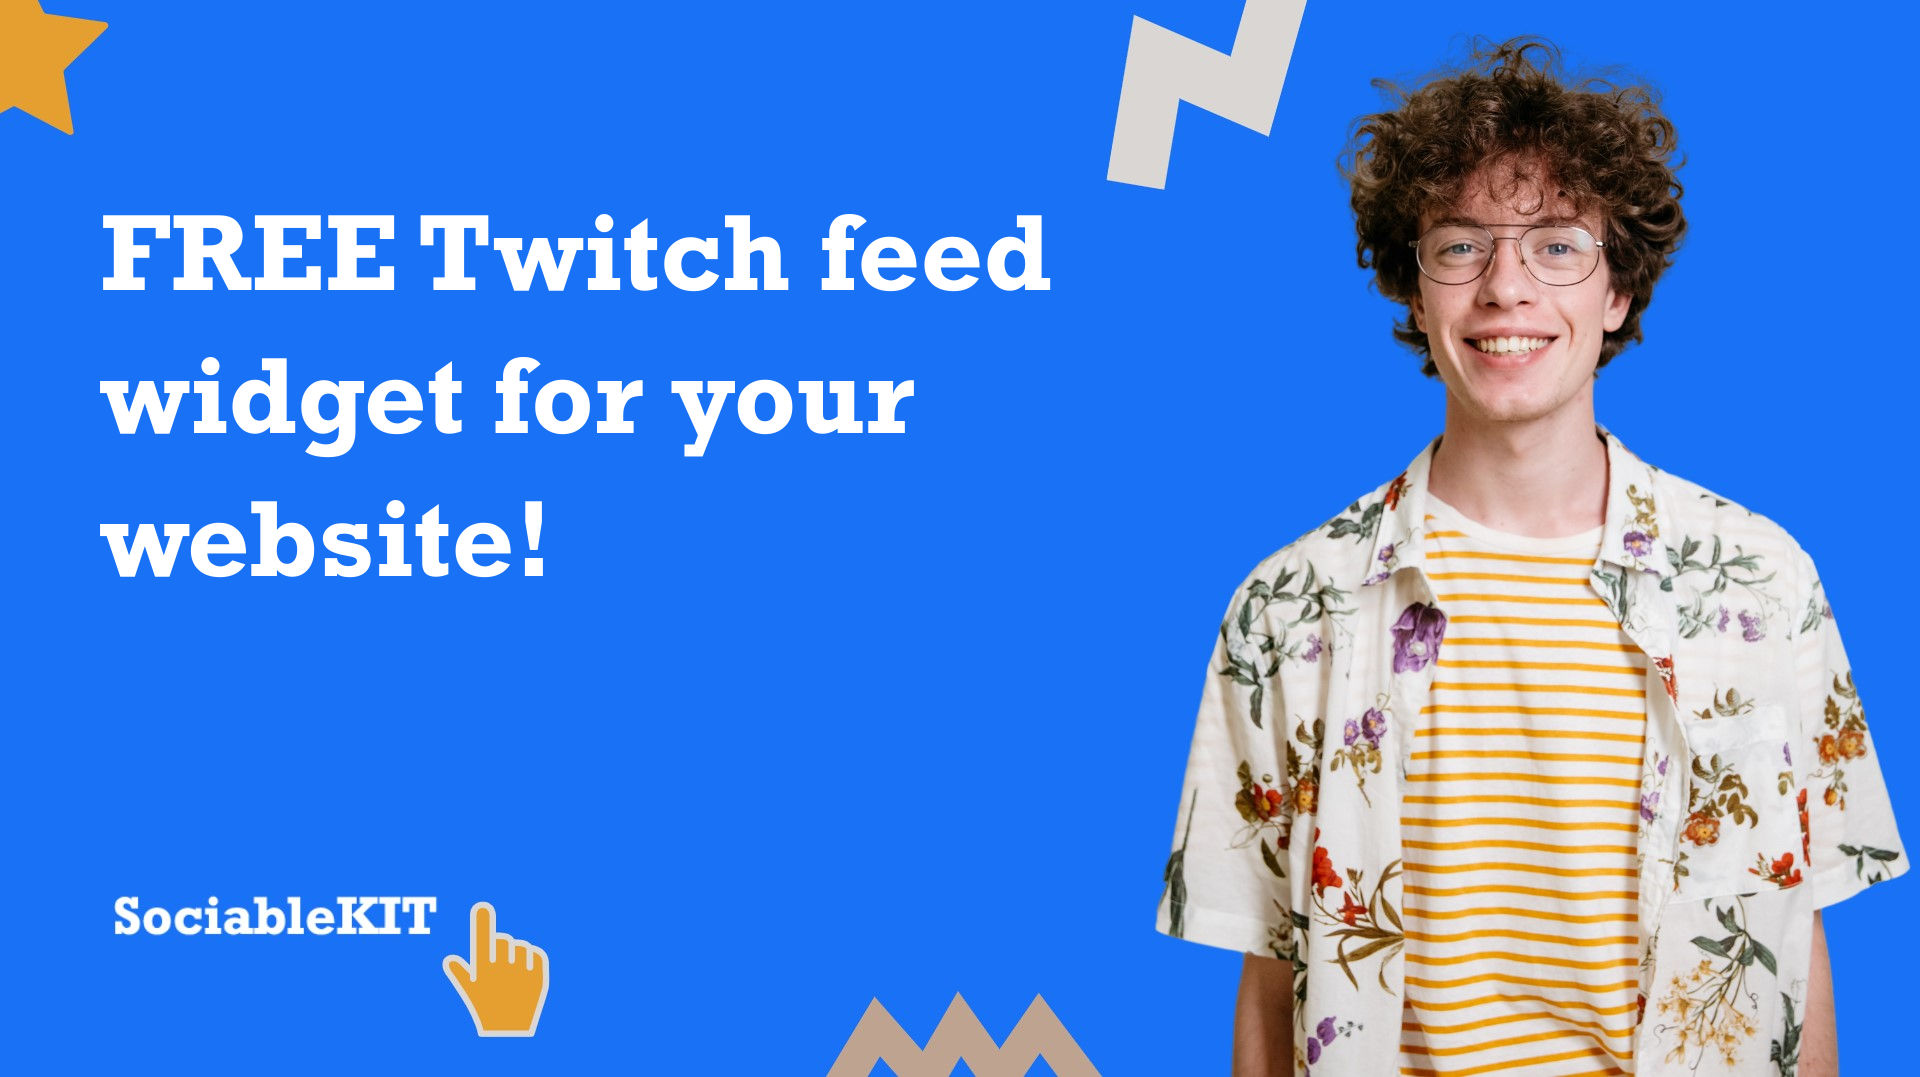 Free Twitch feed widget for your website